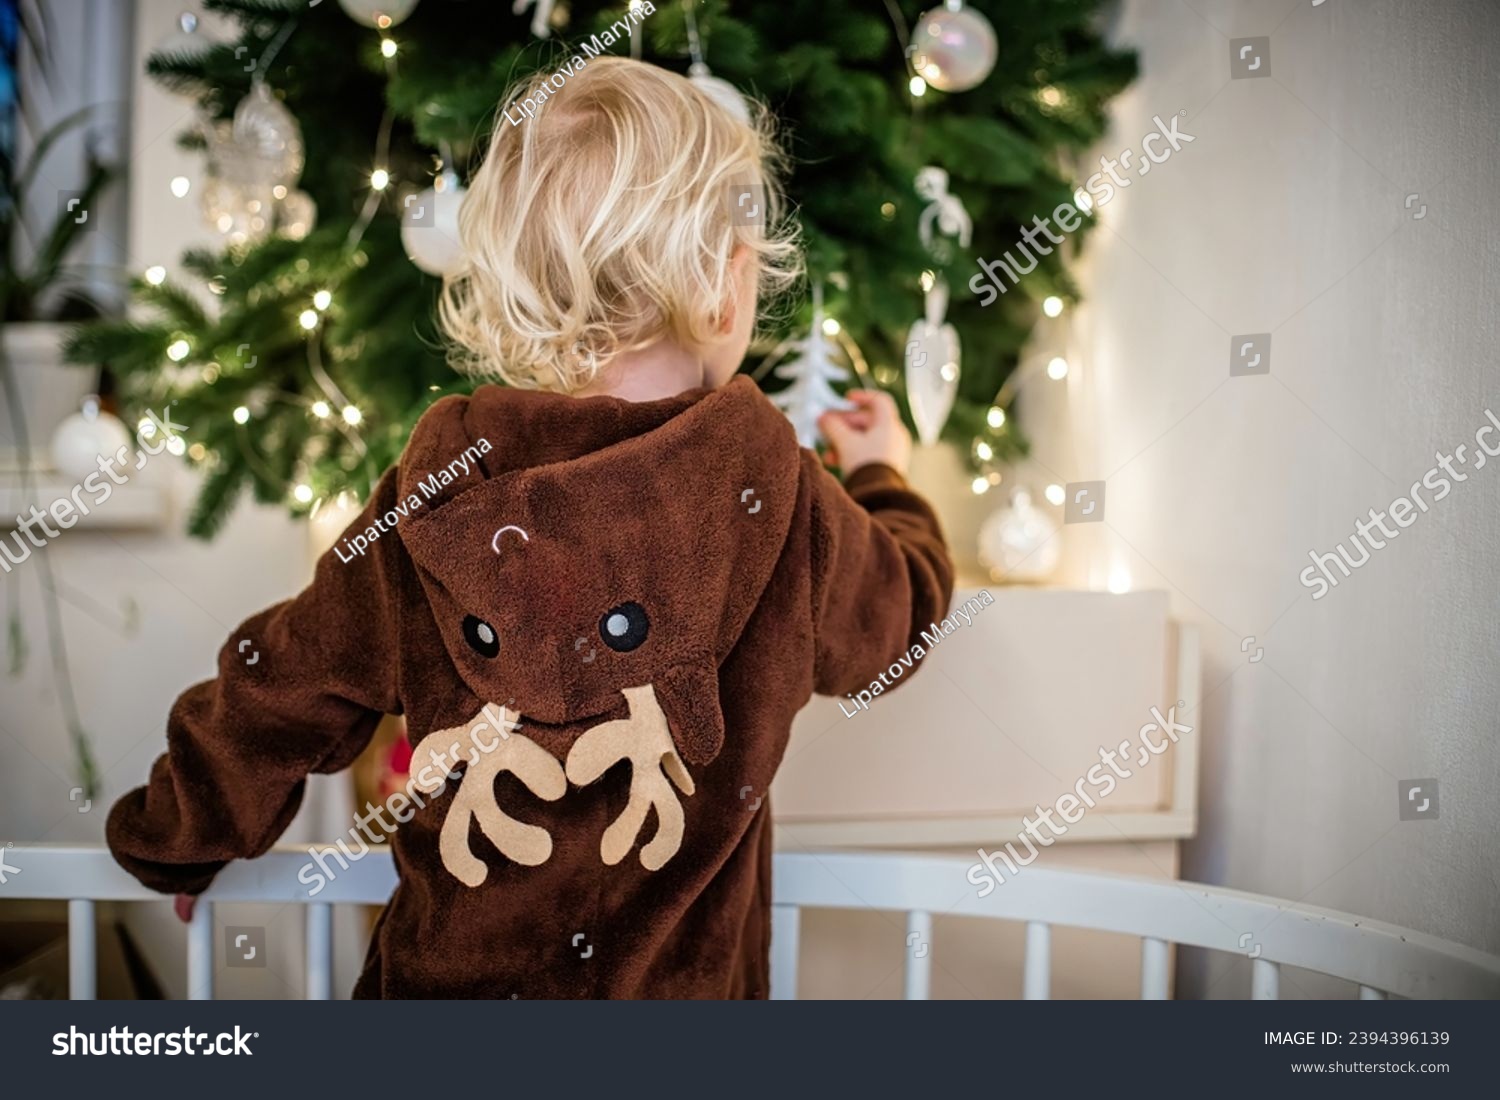 Little girl in reindeer costume decorating Christmas tree while standing in crib #2394396139